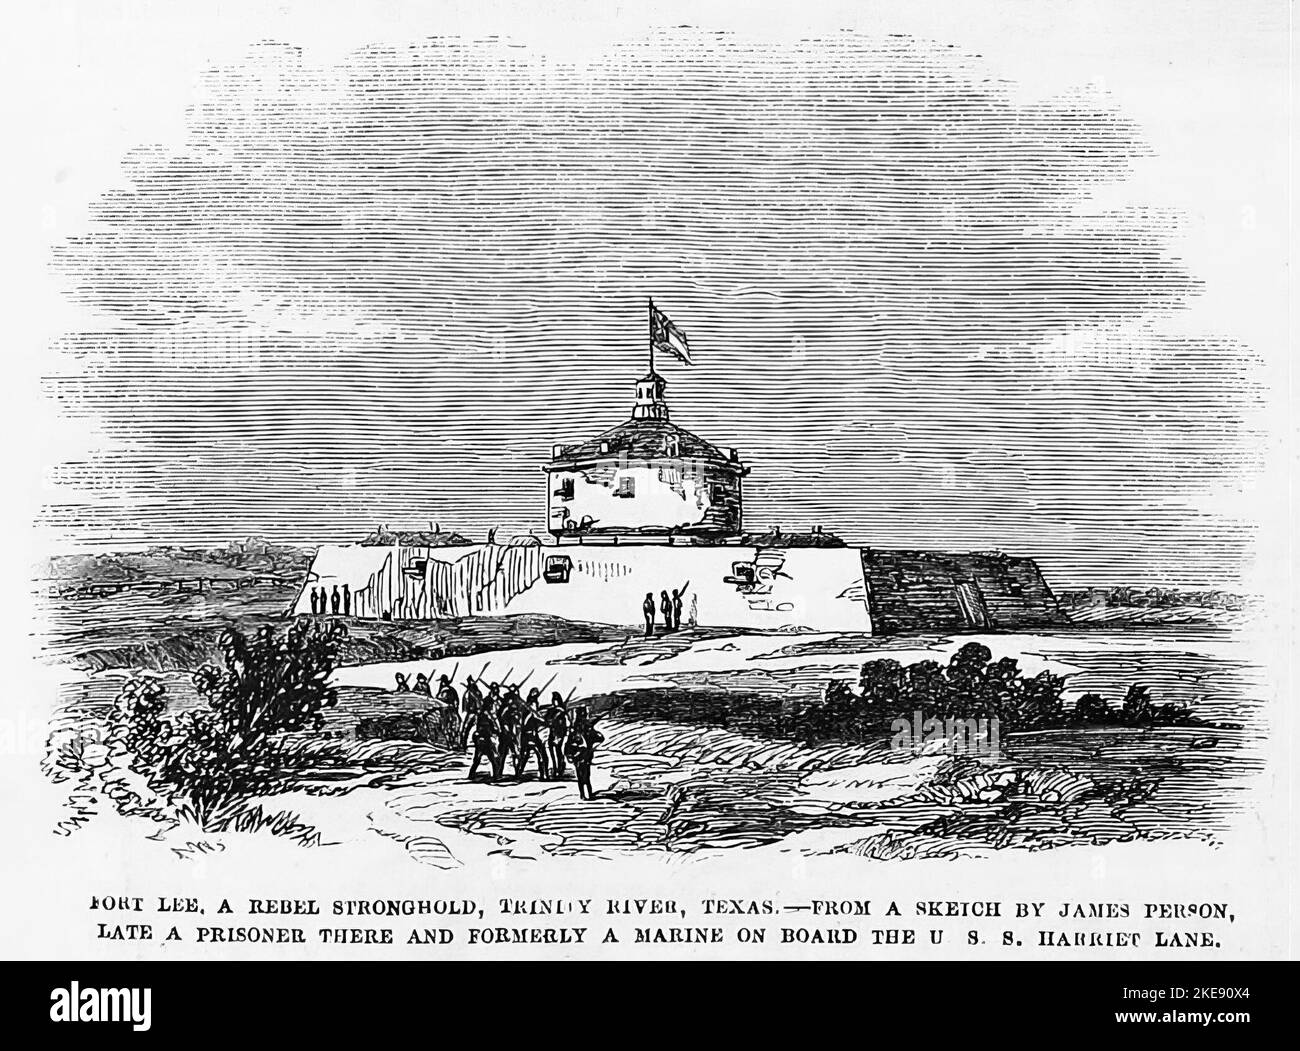 Fort Lee, a Rebel stronghold, Trinity River, Texas. April 1863. 19th century American Civil War illustration from Frank Leslie's Illustrated Newspaper Stock Photo